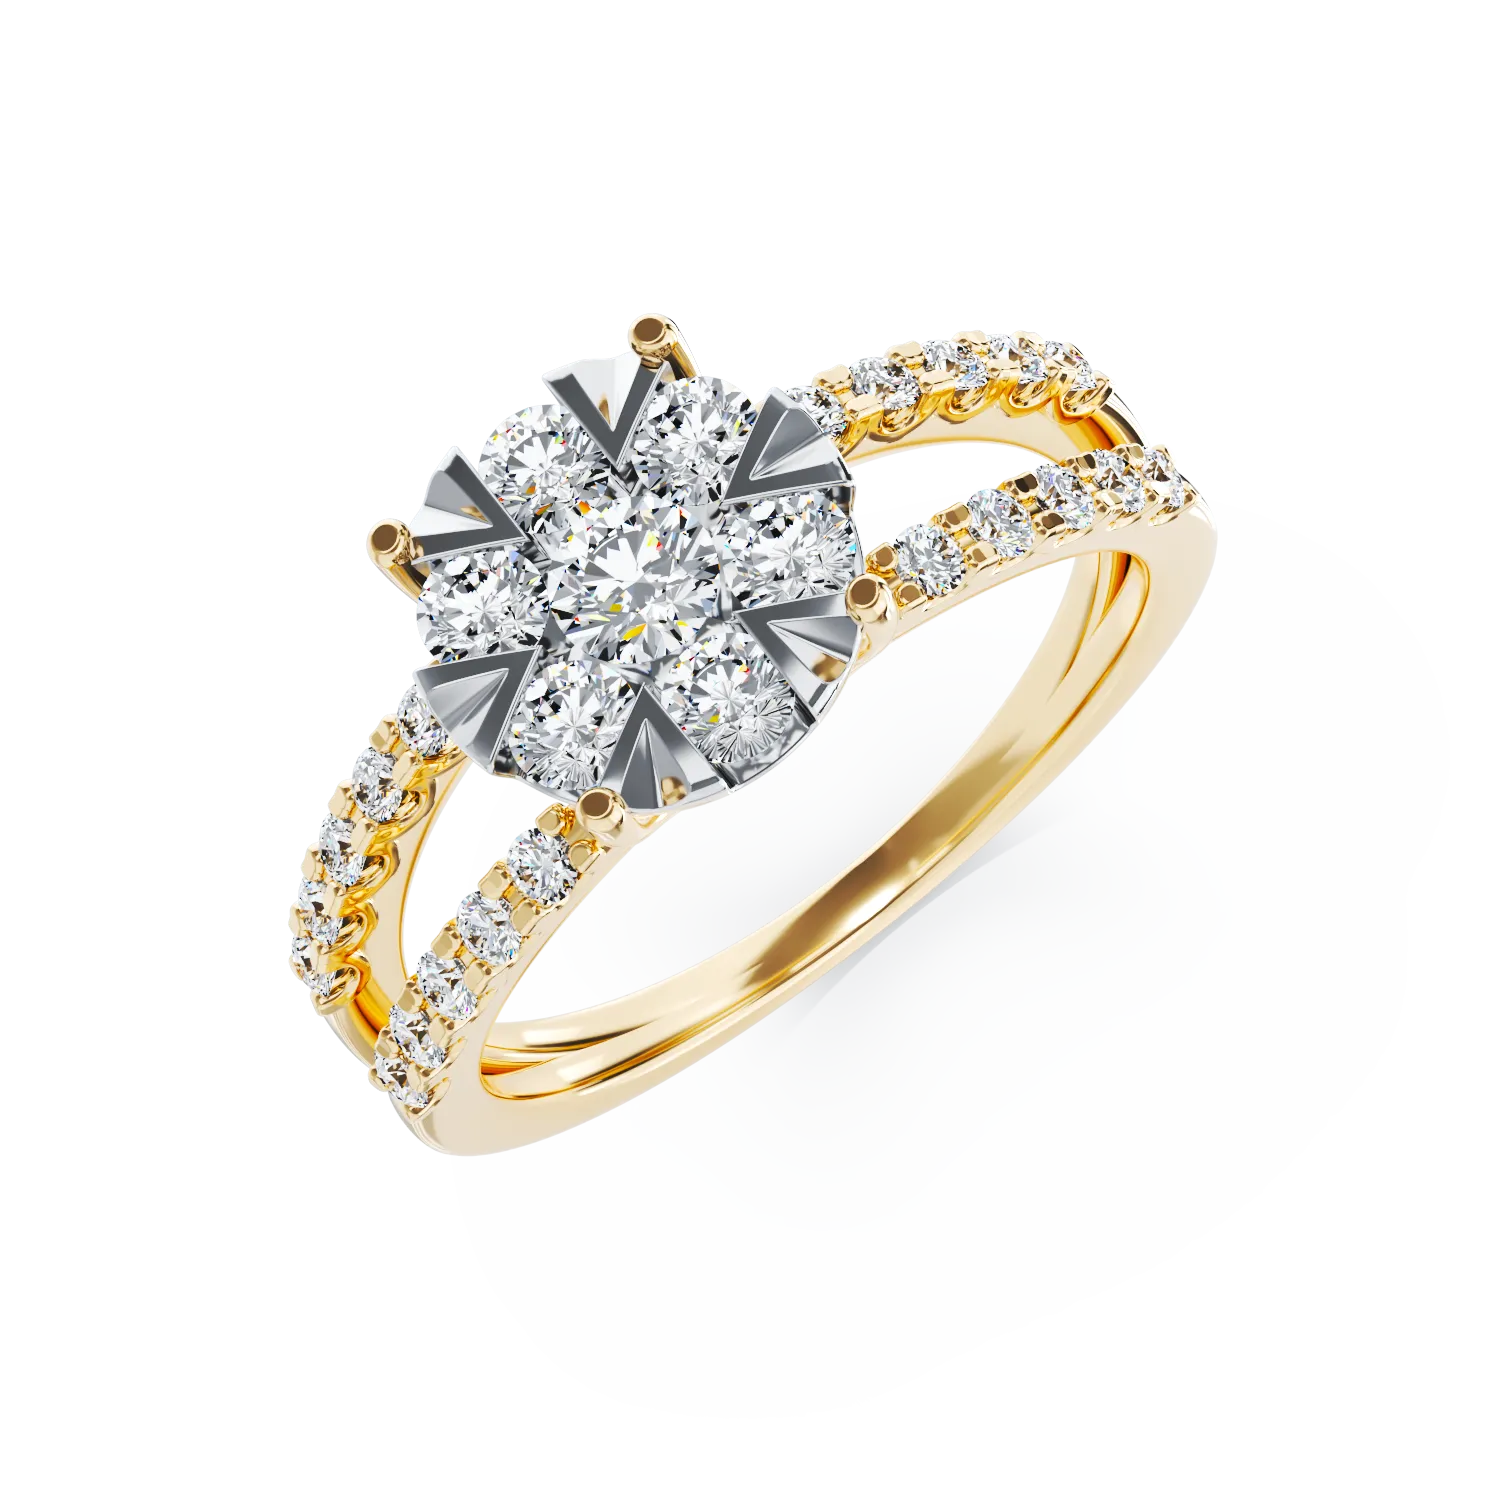 18K yellow gold engagement ring with 1ct diamonds